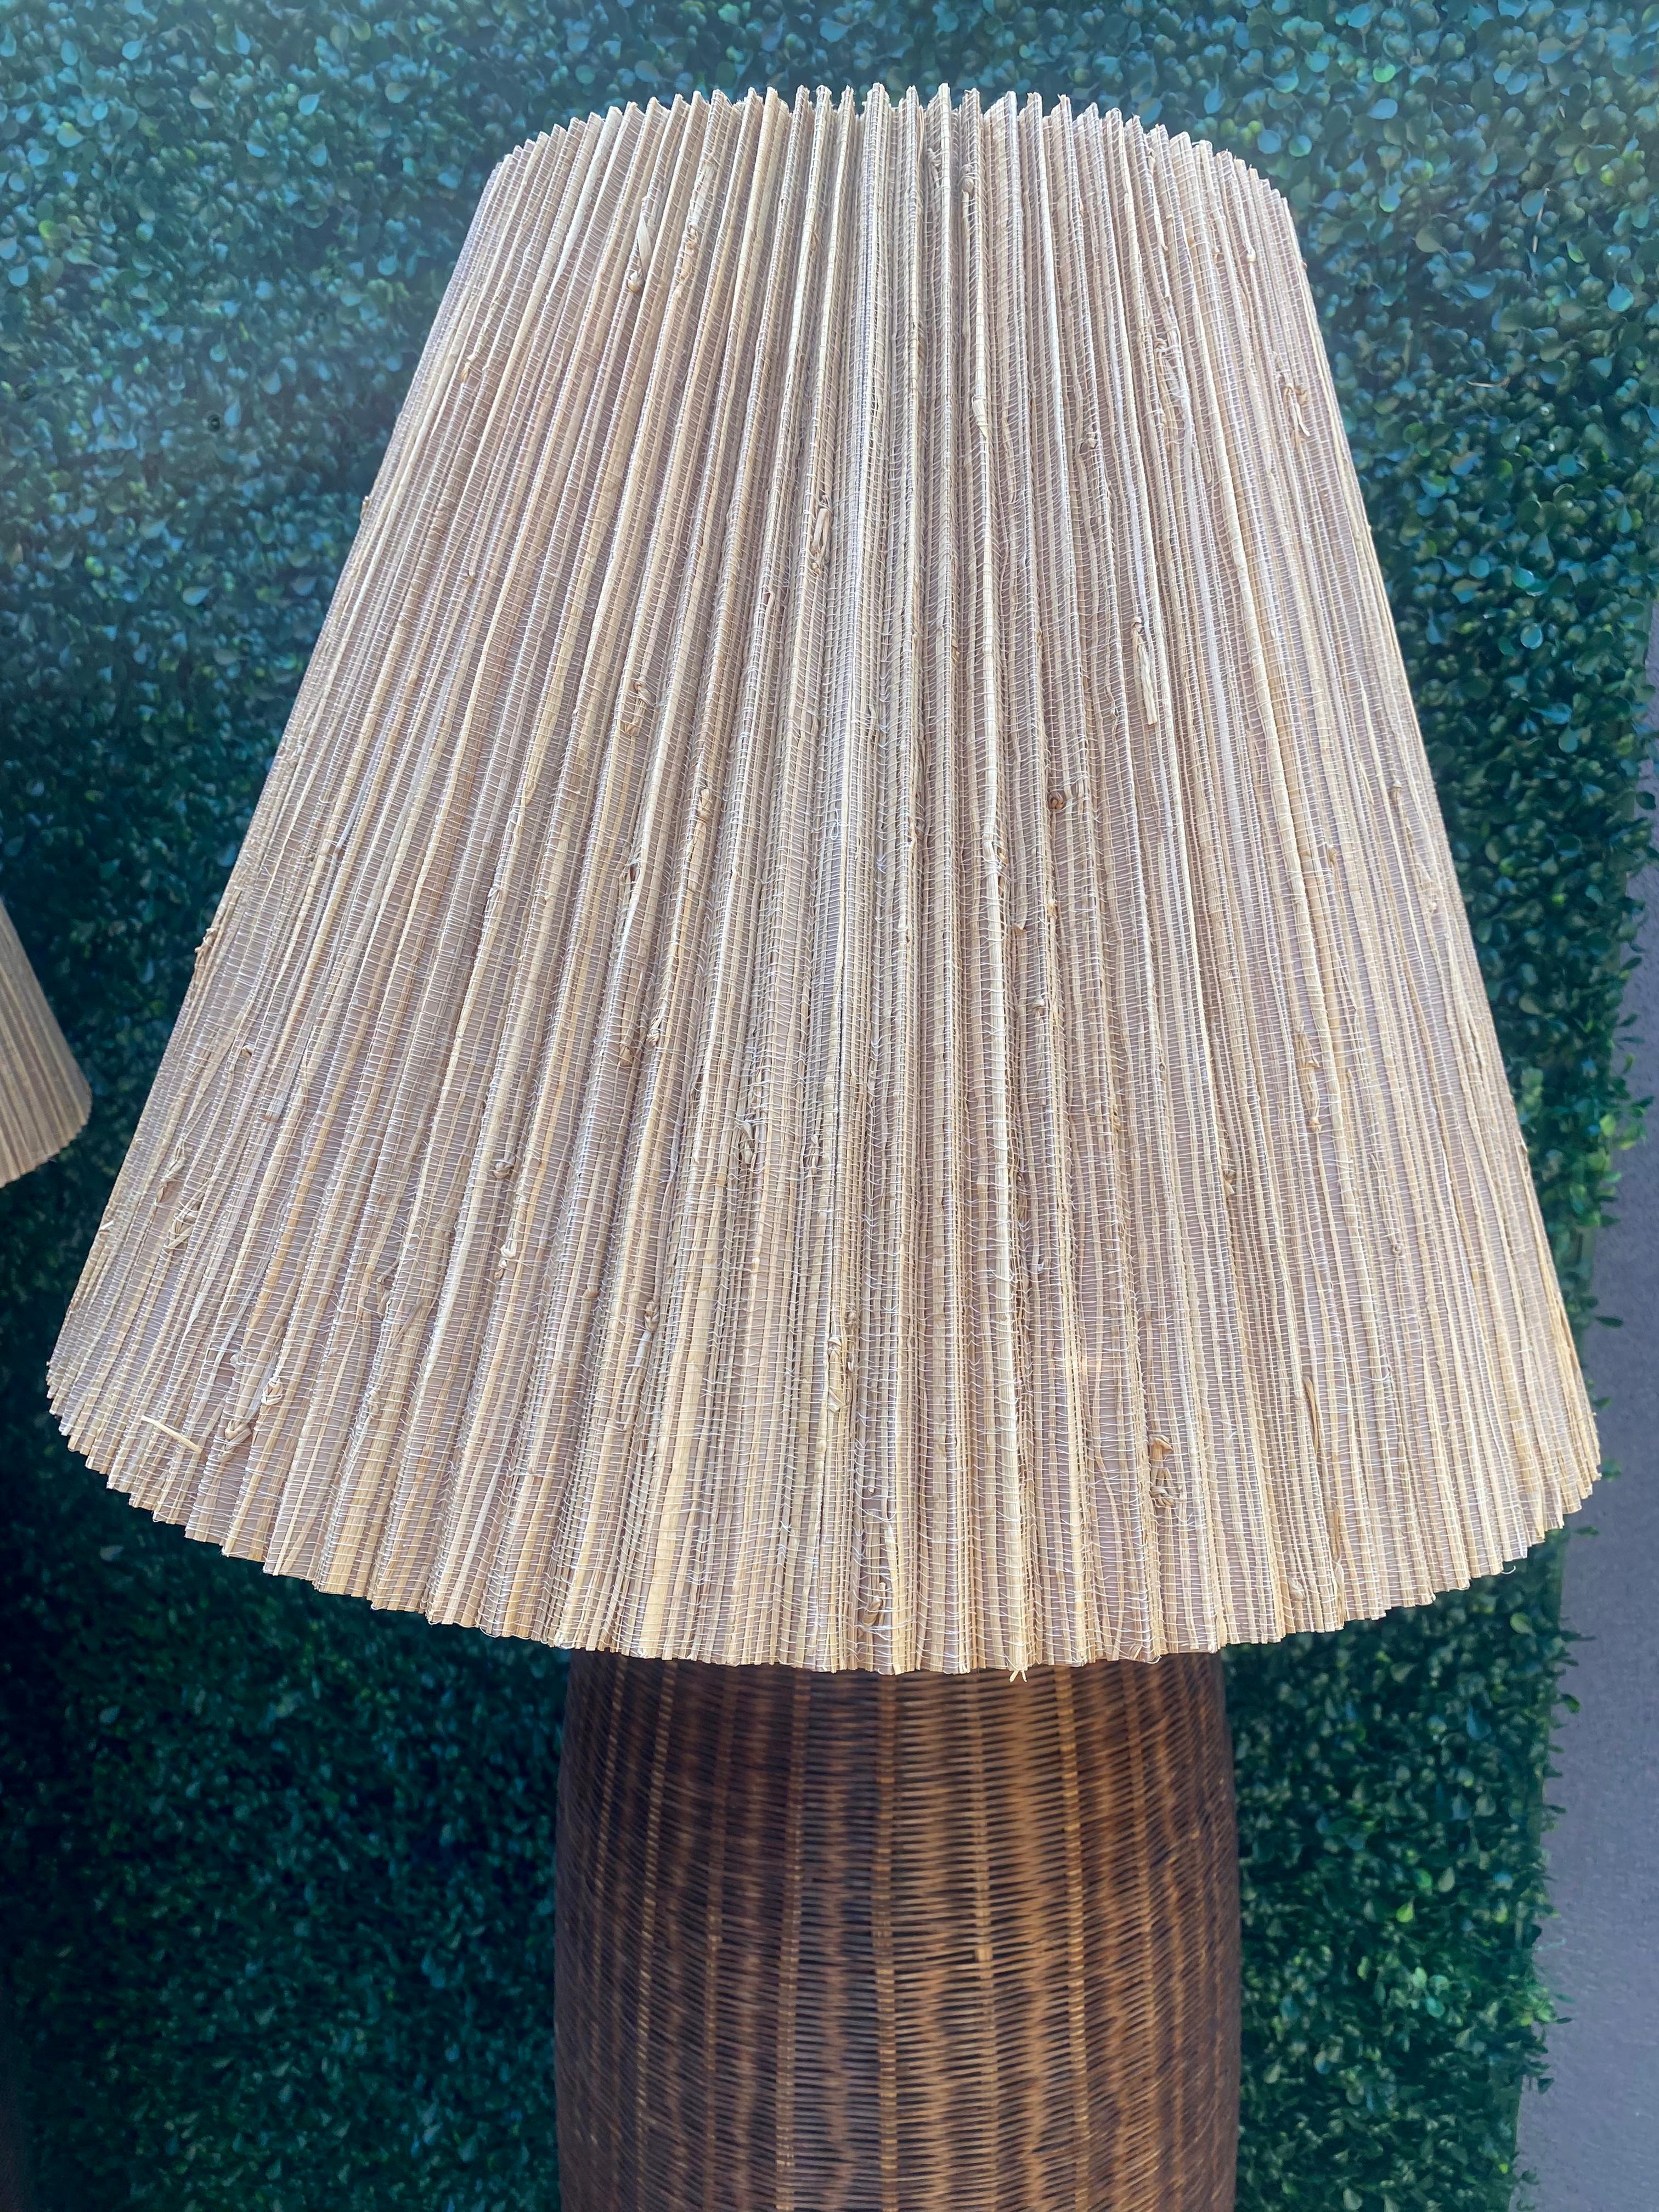 1970s Fine Rattan Wicker Vessel Floor Lamps With Shades, Set of 2 For Sale 5